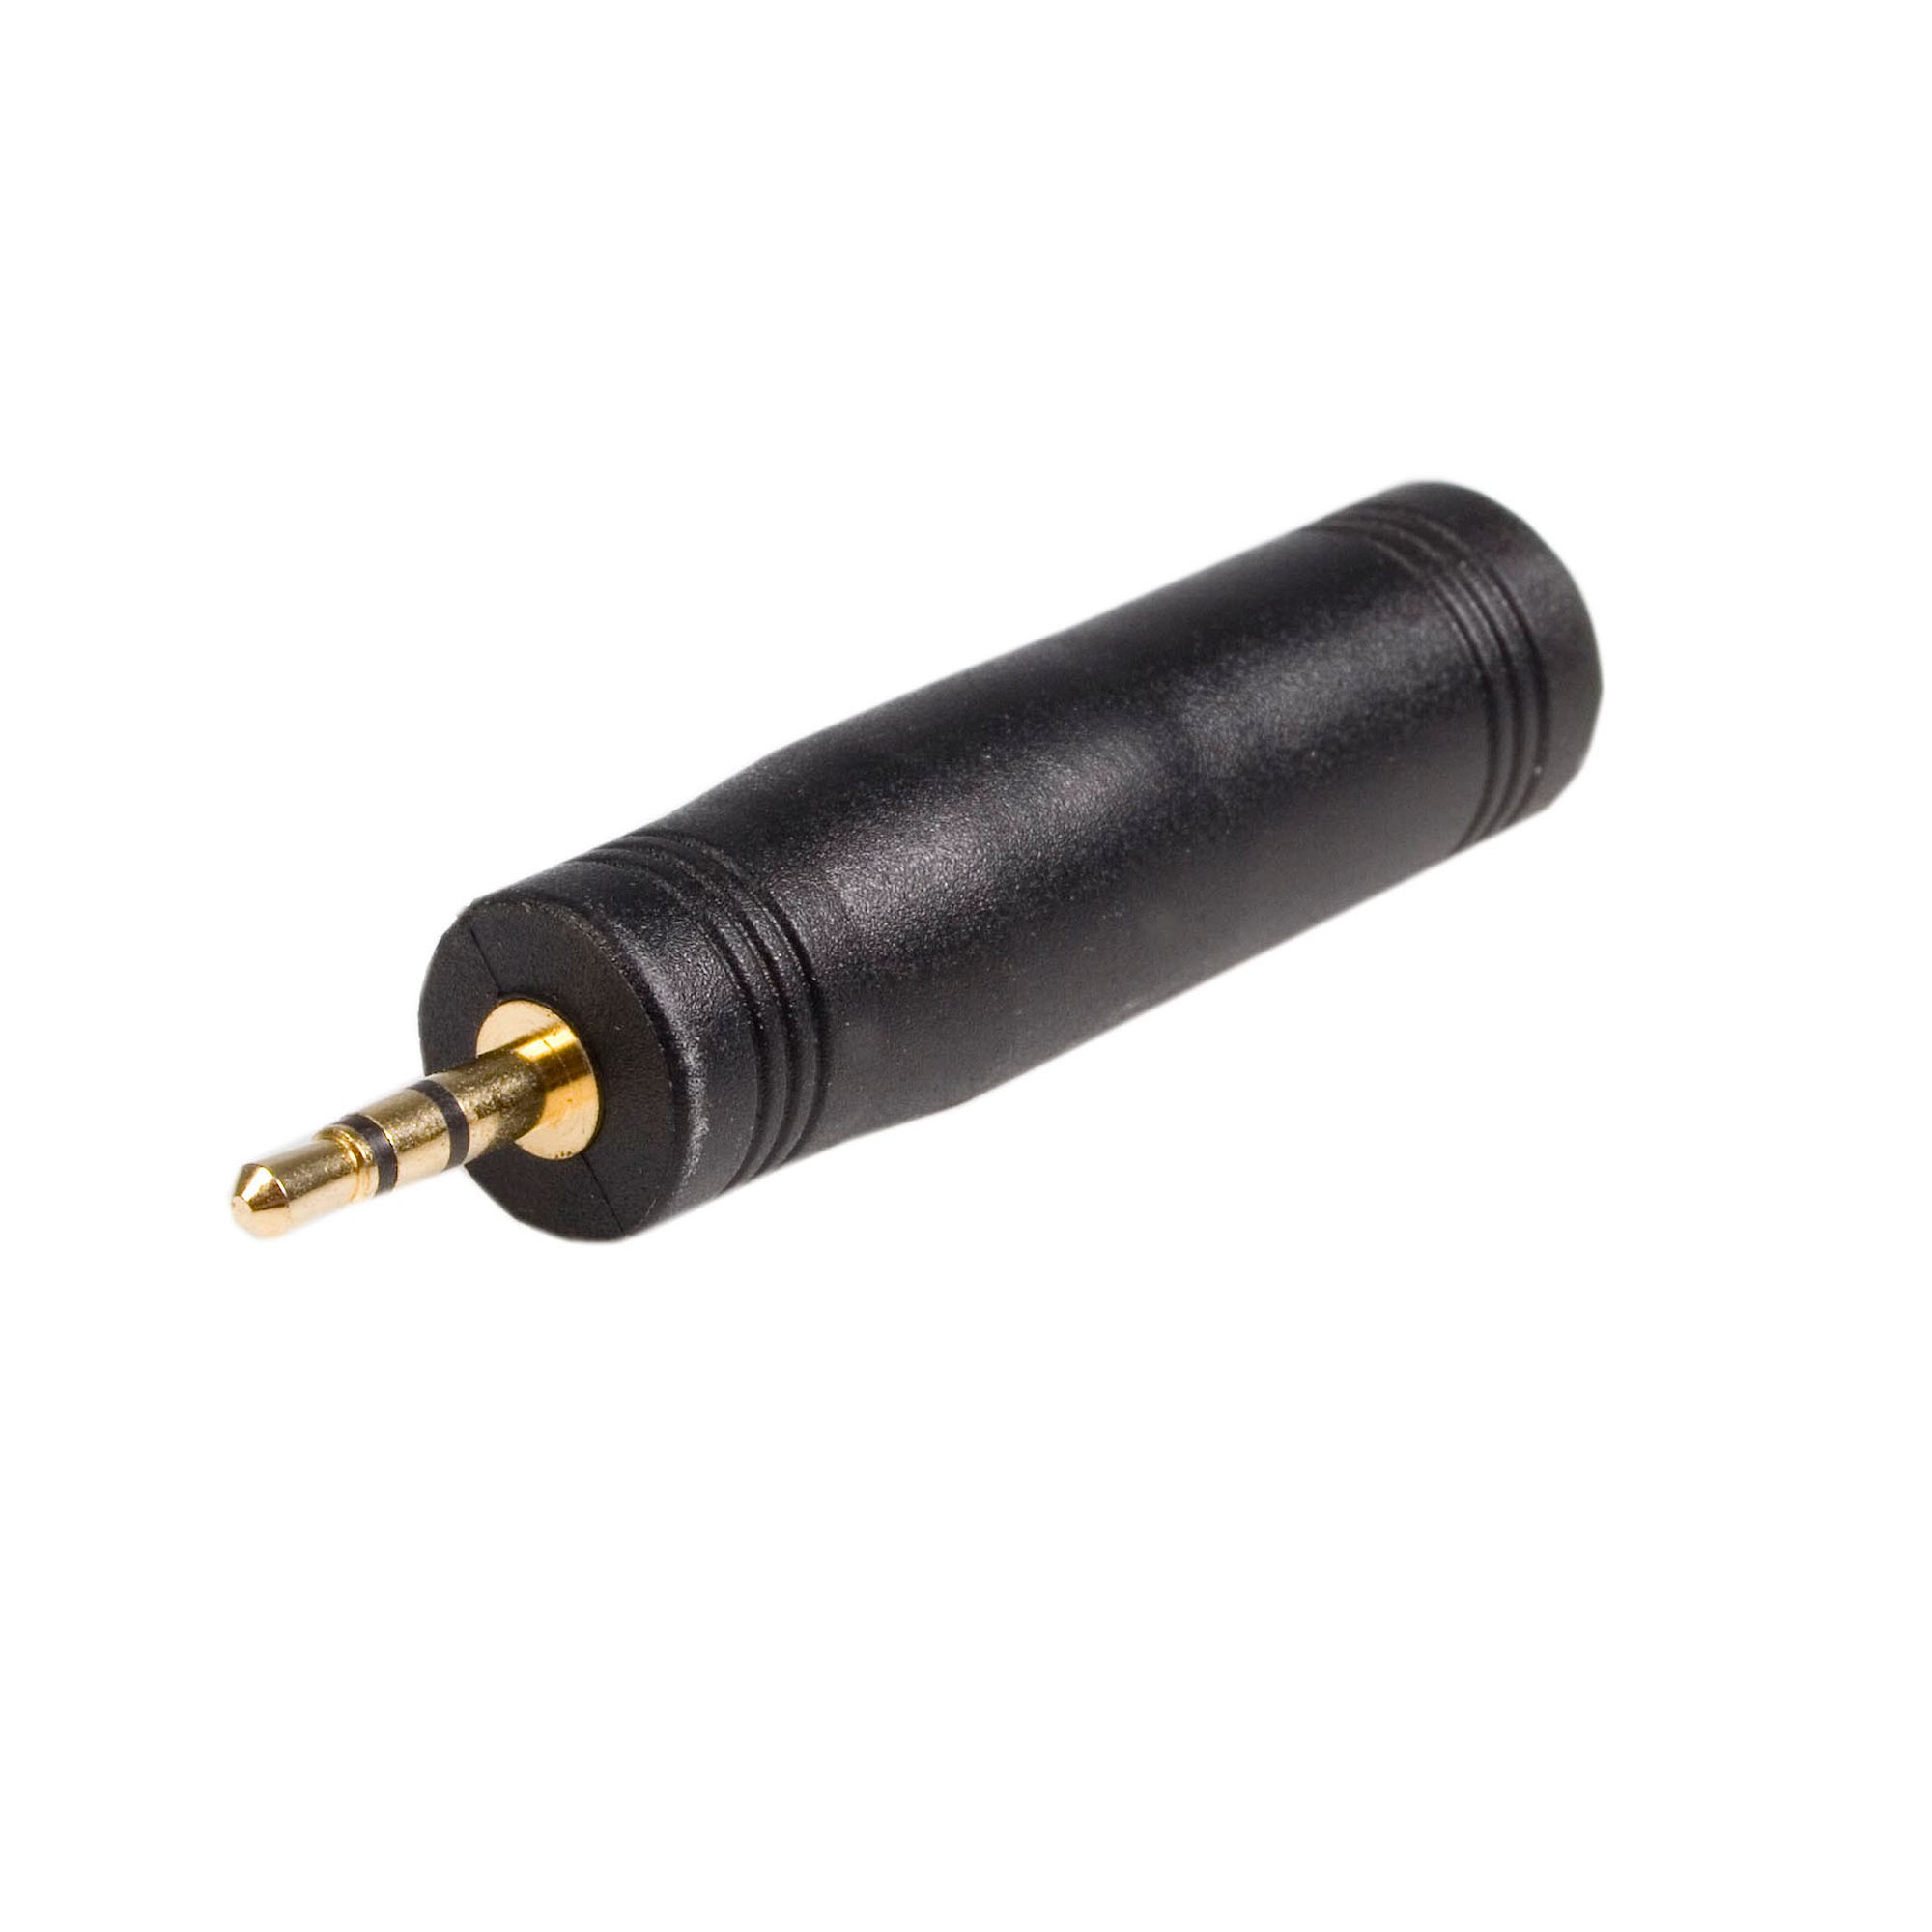 2.5mm (Male Plug) to 3.5mm (Female Jack) Stereo Adapter